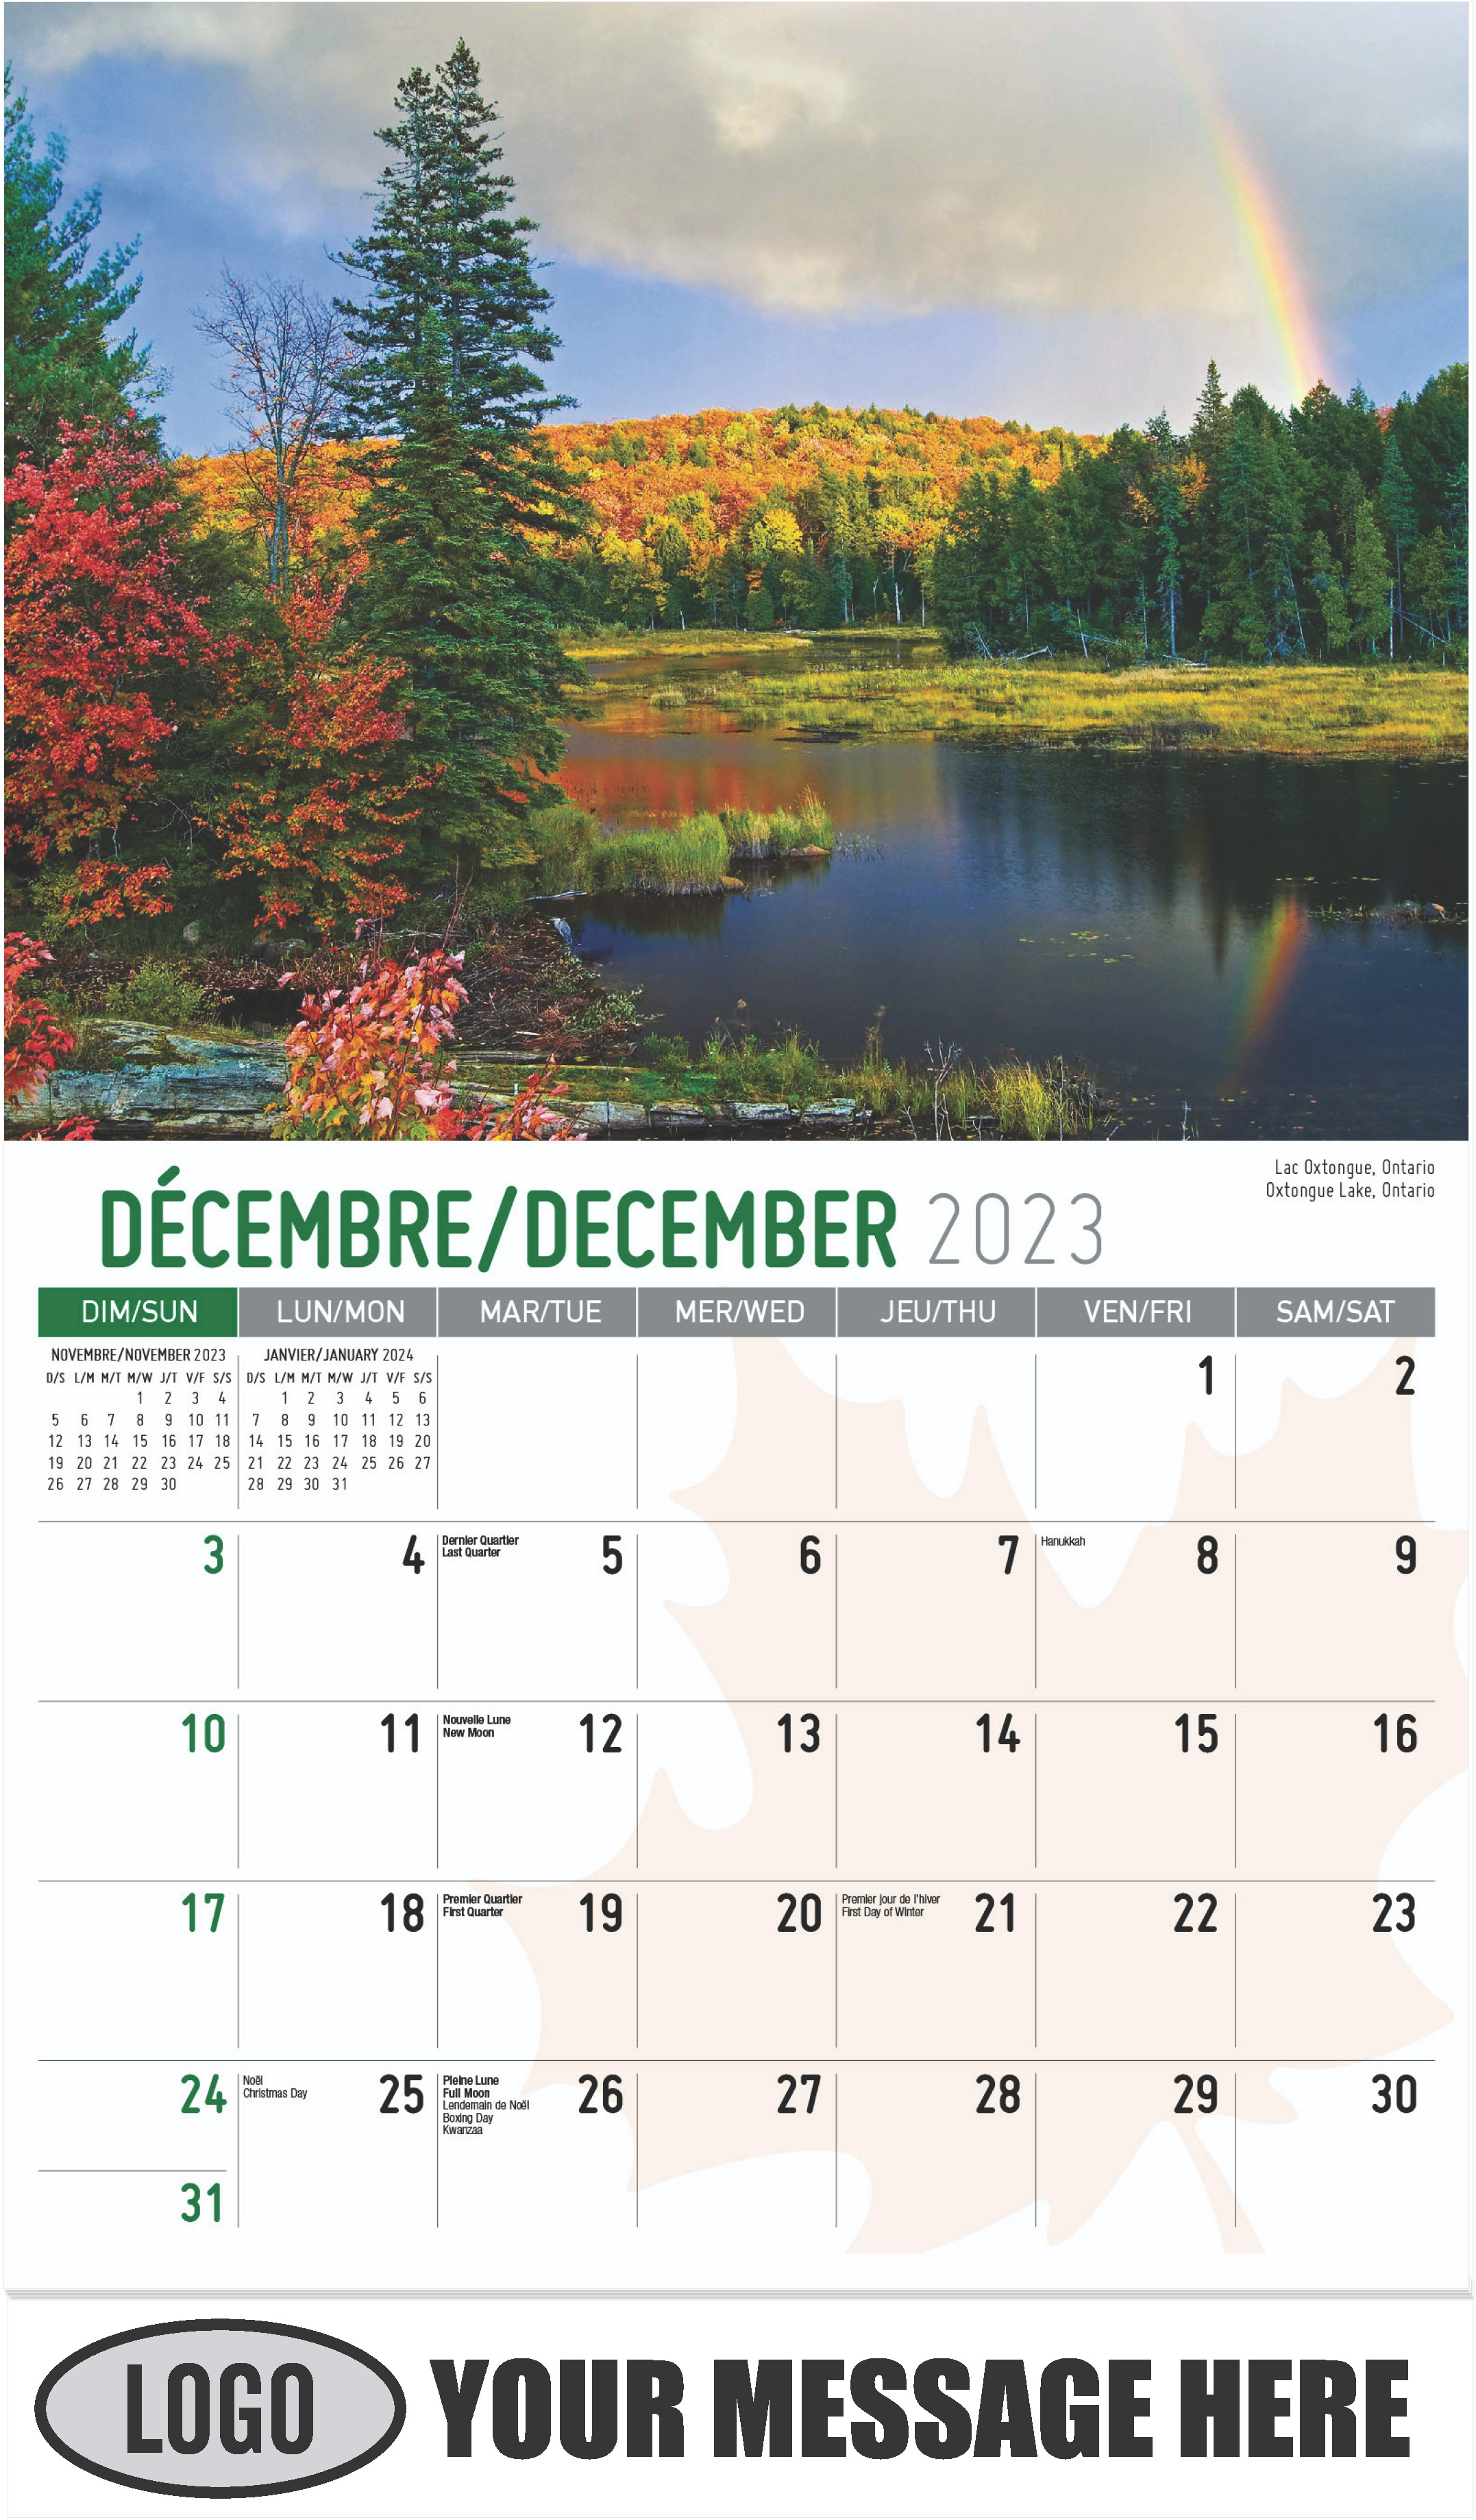 Oxtongue Lake, Ontario - December 2023 - Scenes of Canada(French-English bilingual) 2023 Promotional Calendar